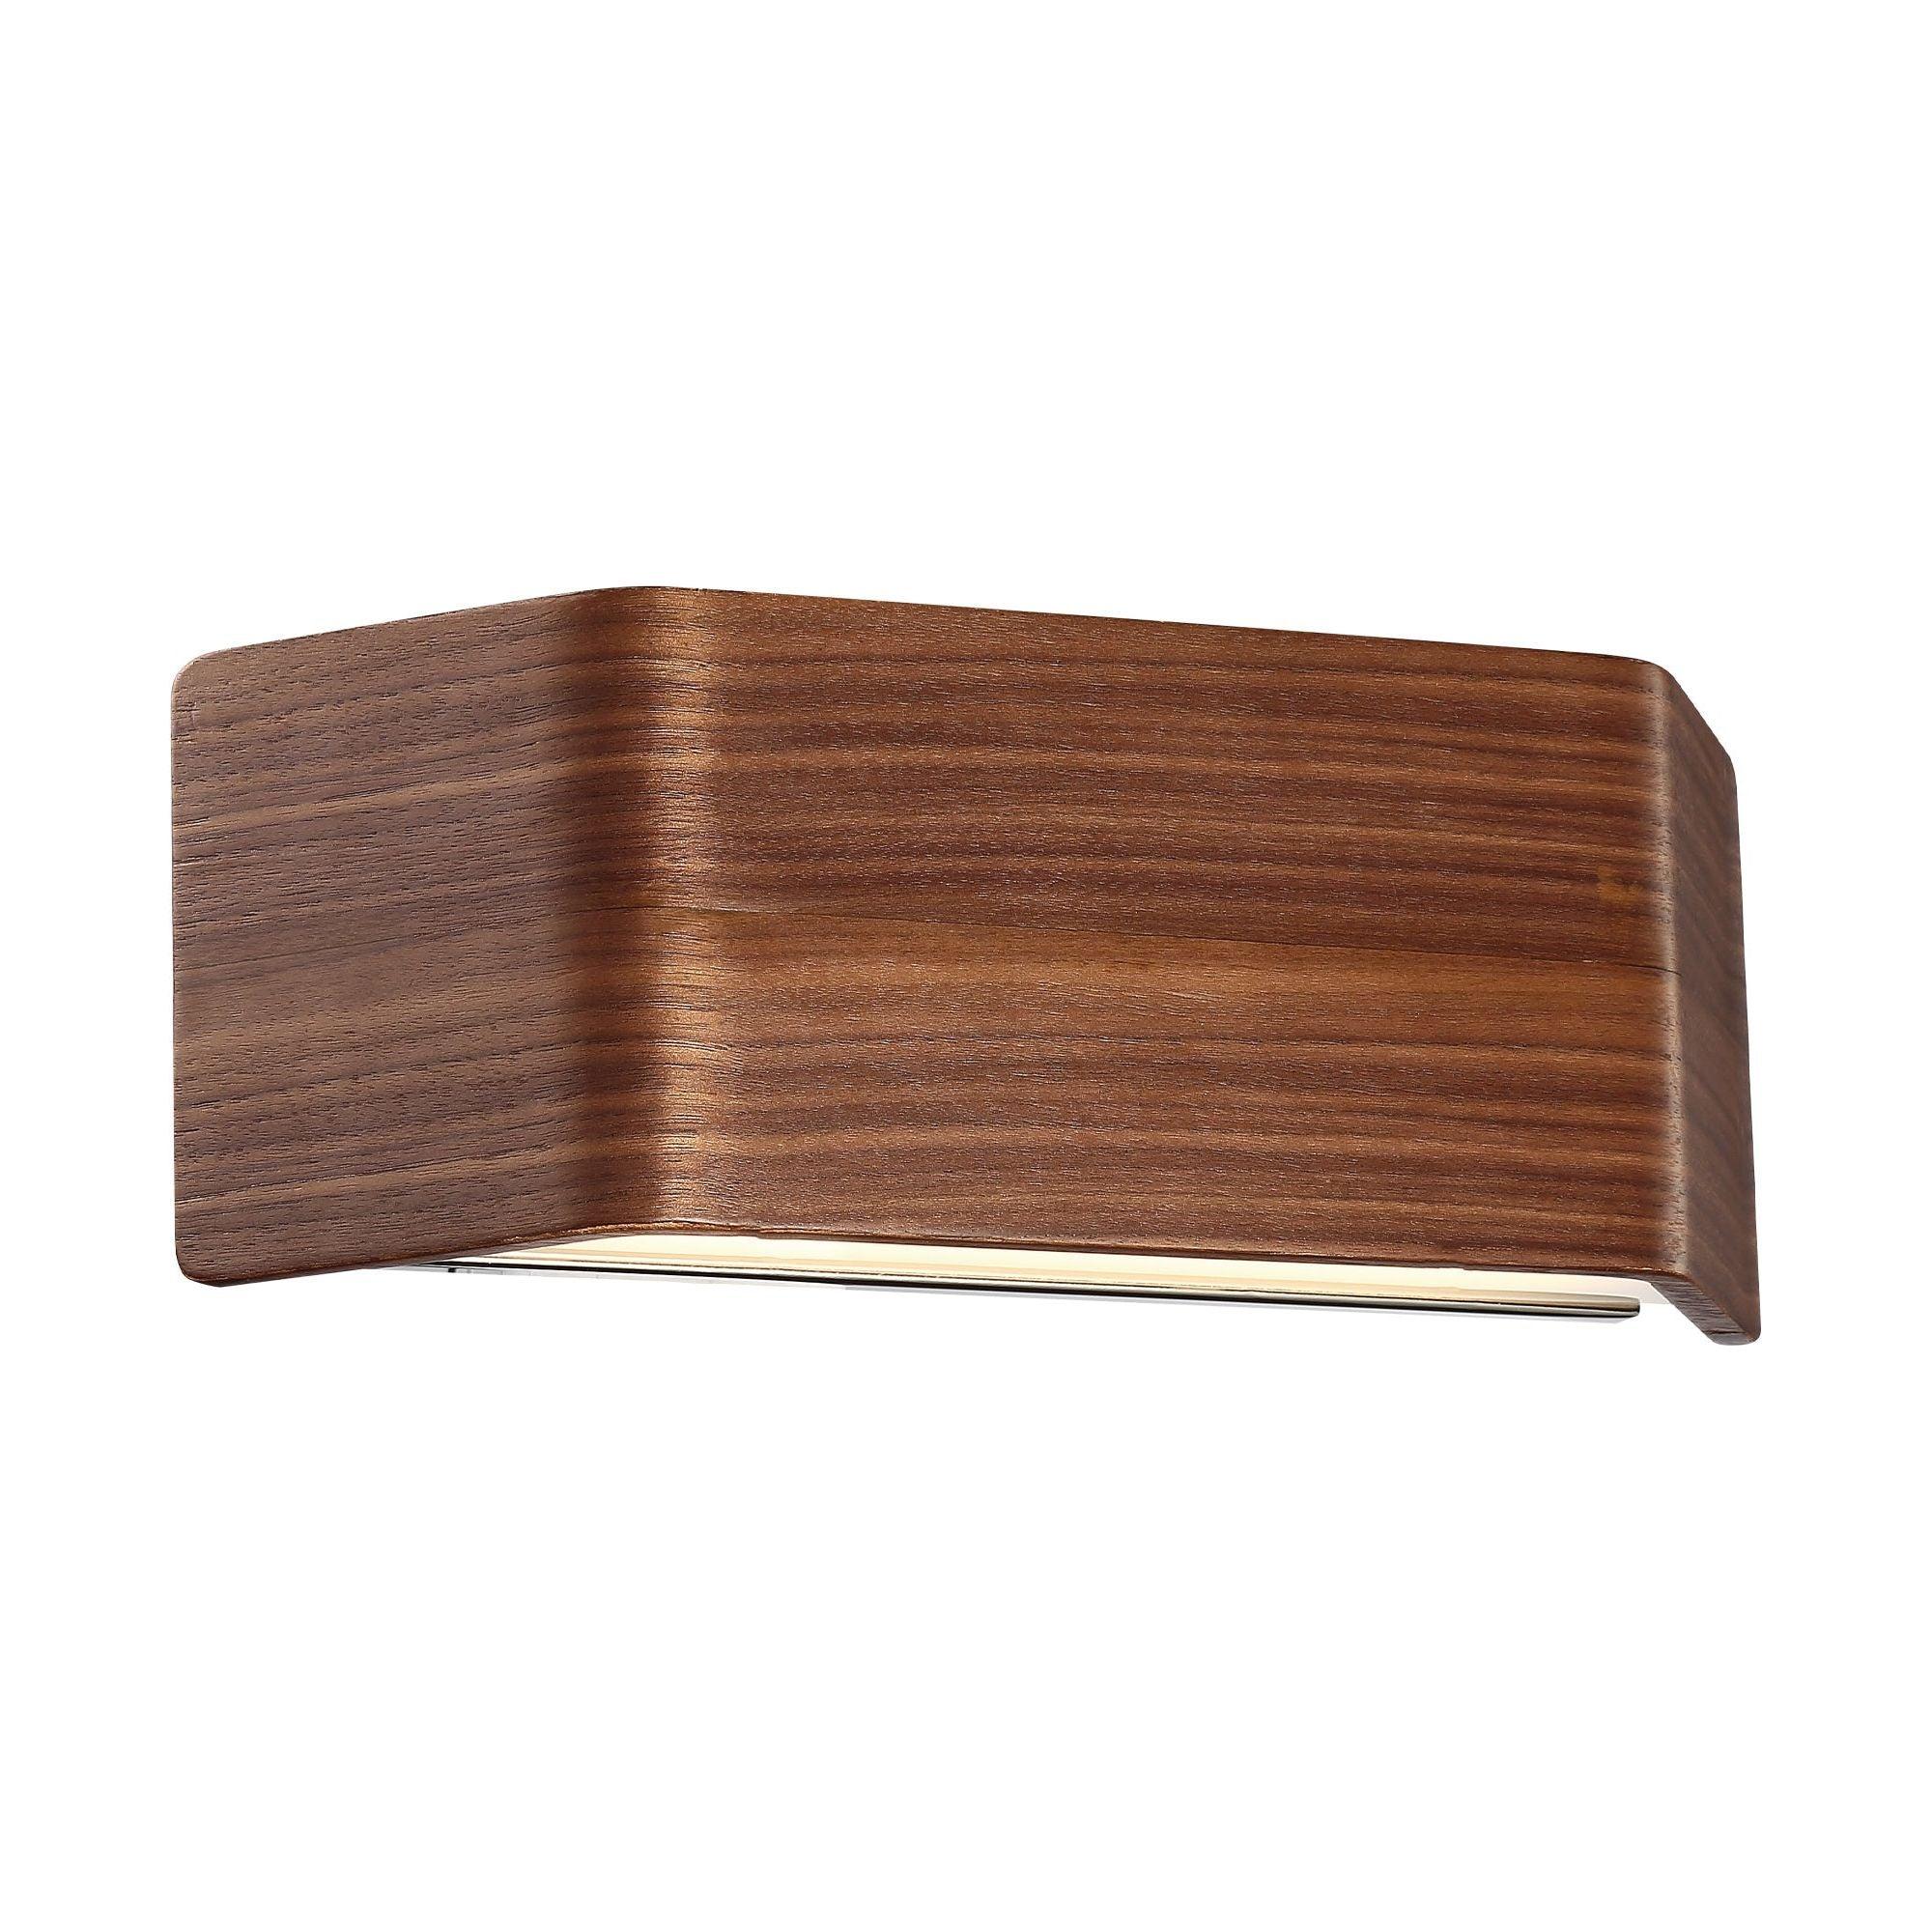 Modern Forms - Asgard LED Wall Sconce - Lights Canada